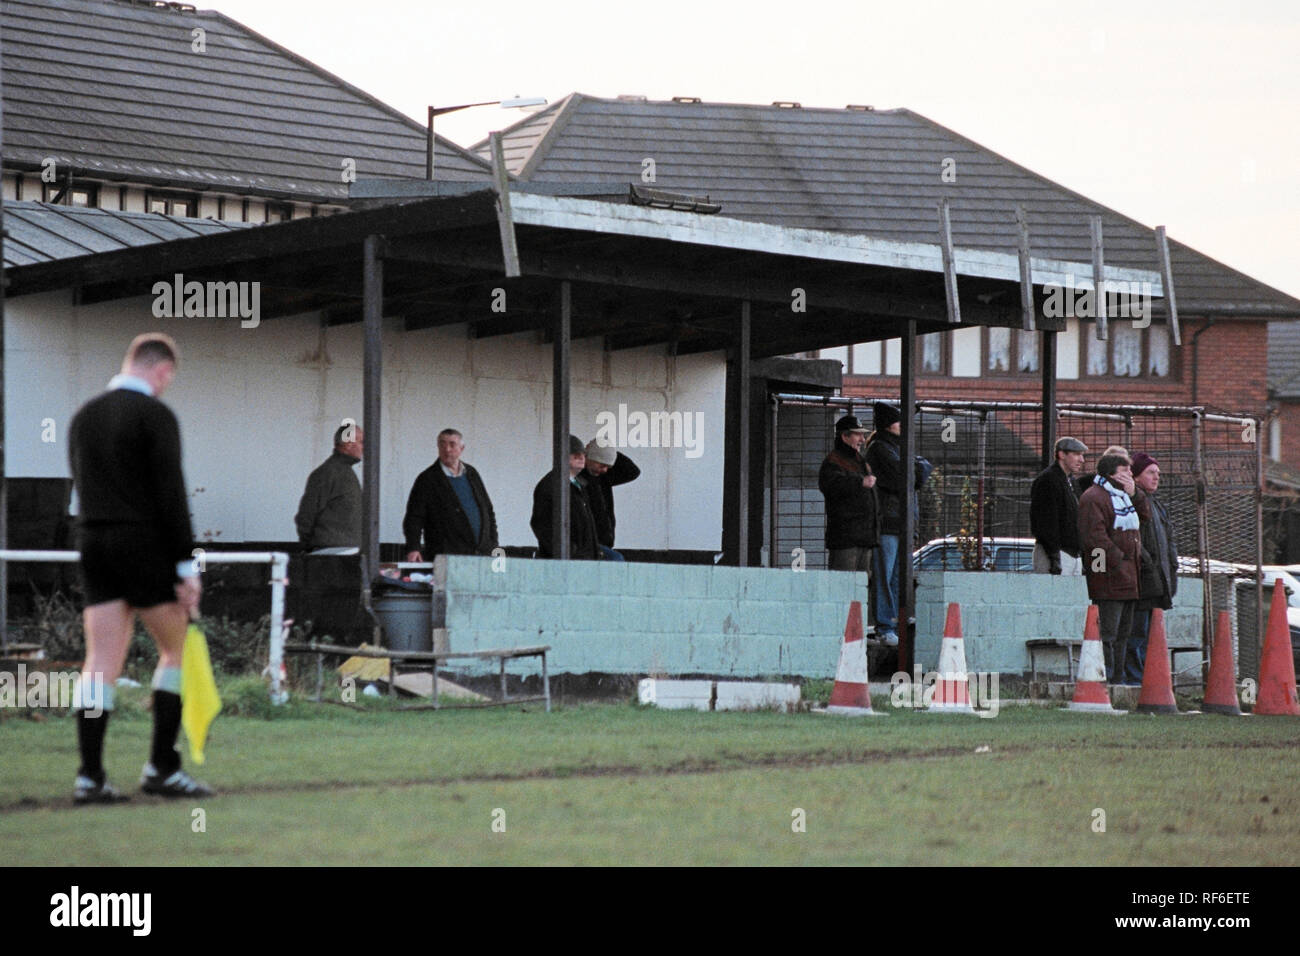 The changing face of football grounds - Page 8 Knees up Mother Brown Forum: